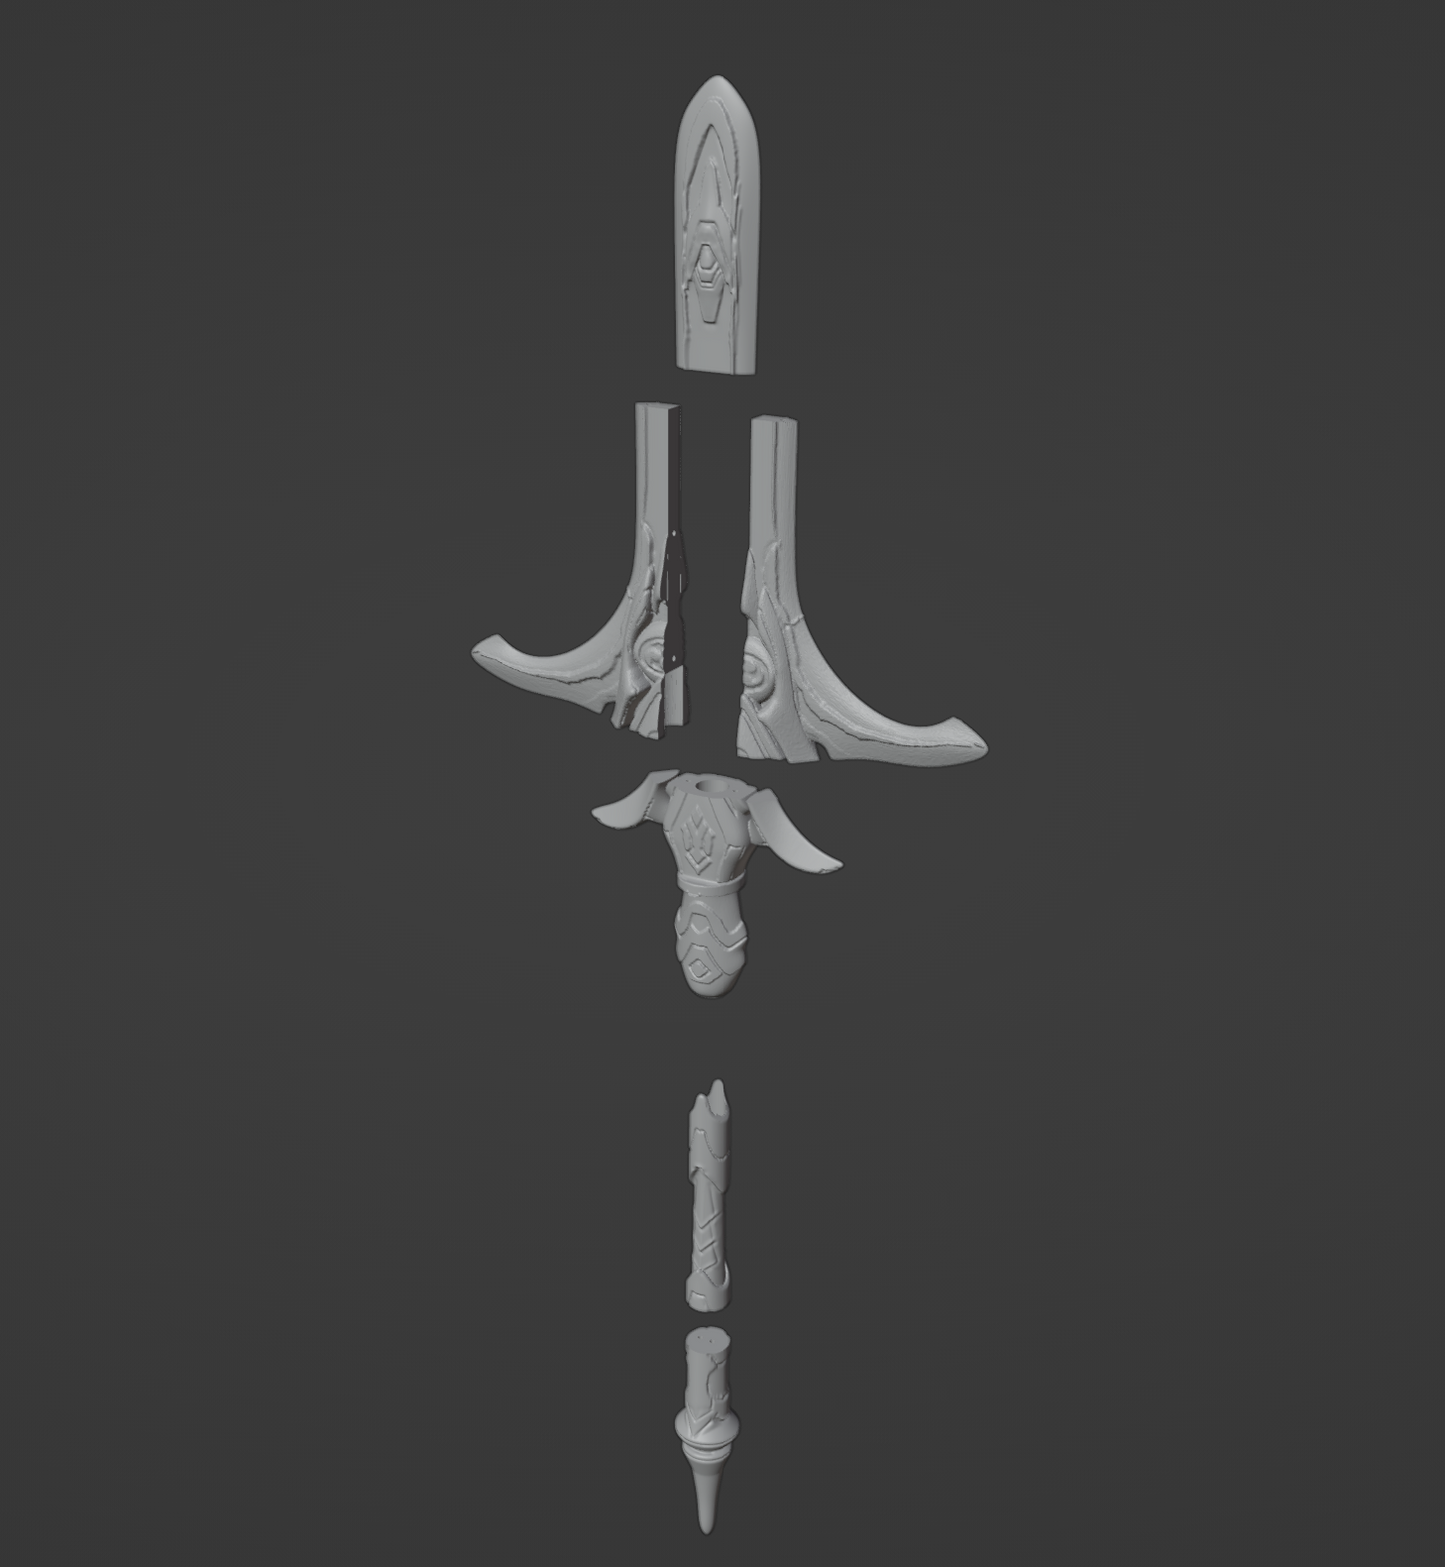 Kitain Cross Spear - Digital 3D Model Files and Physical 3D Printed Kit Options - Genshin Impact Cosplay